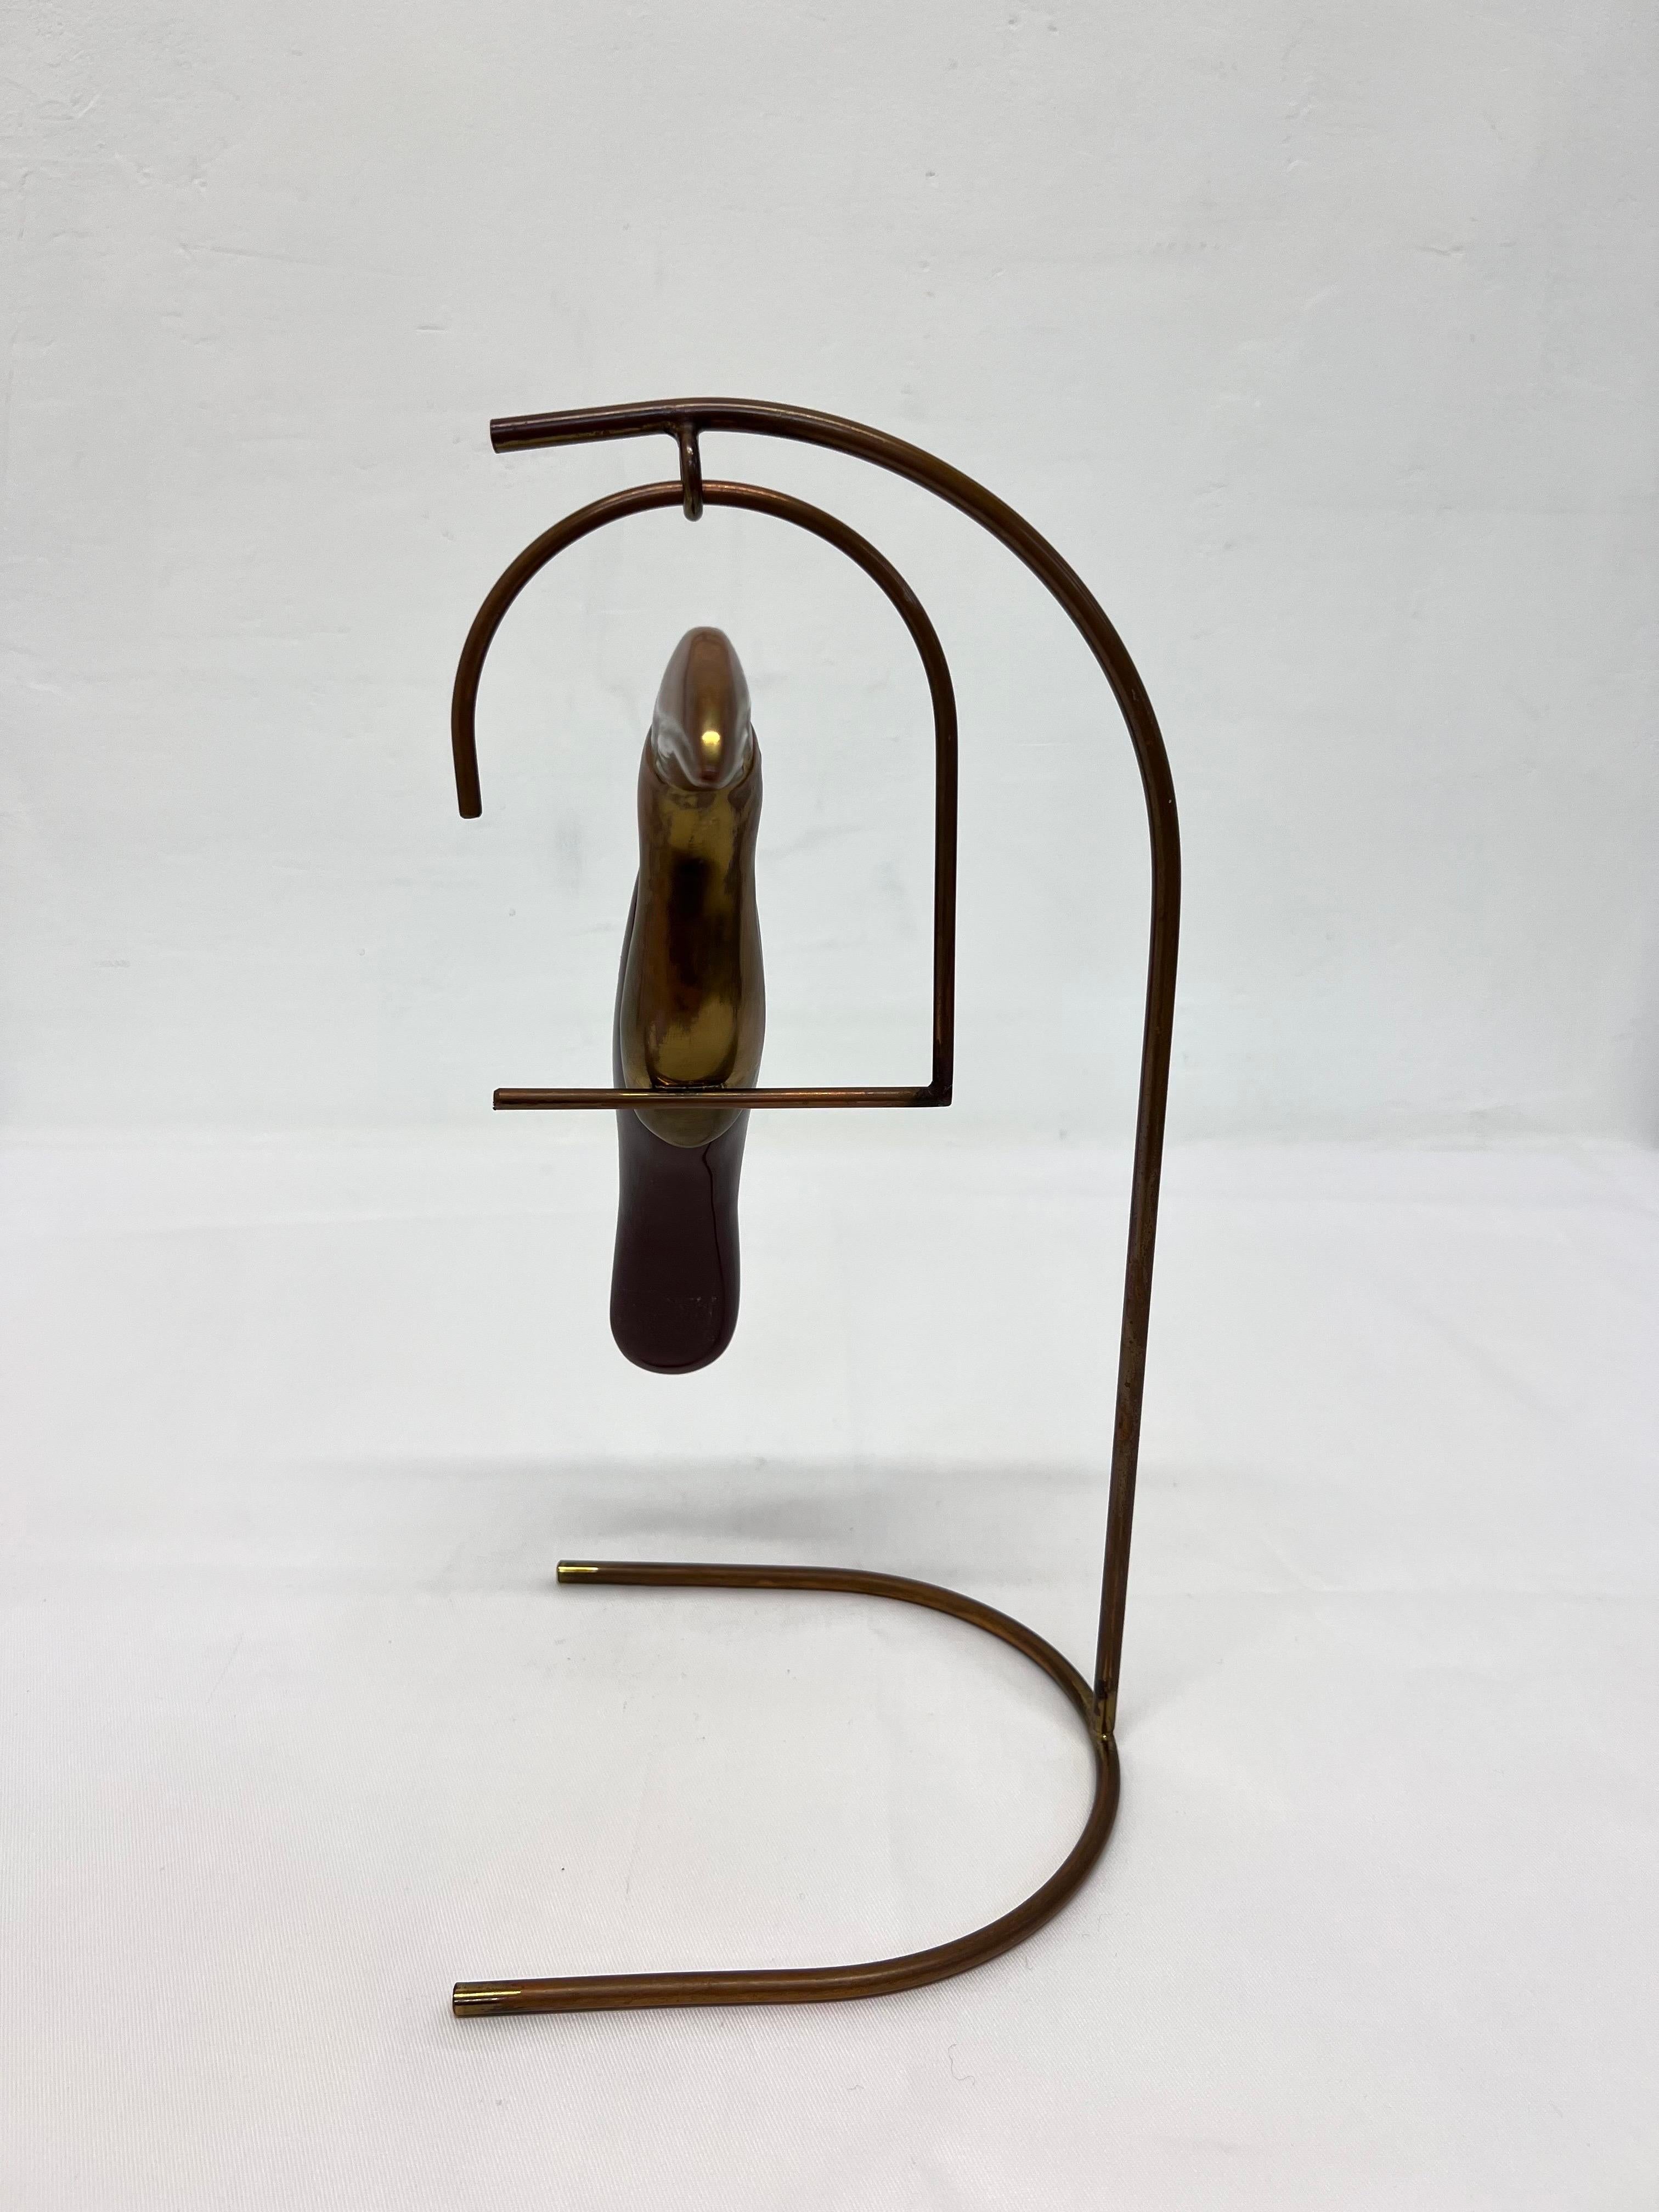 Patinated brass Toucan sculpture with dark maroon colored resin body suspended from brass metal stand, Brazil 1960s.